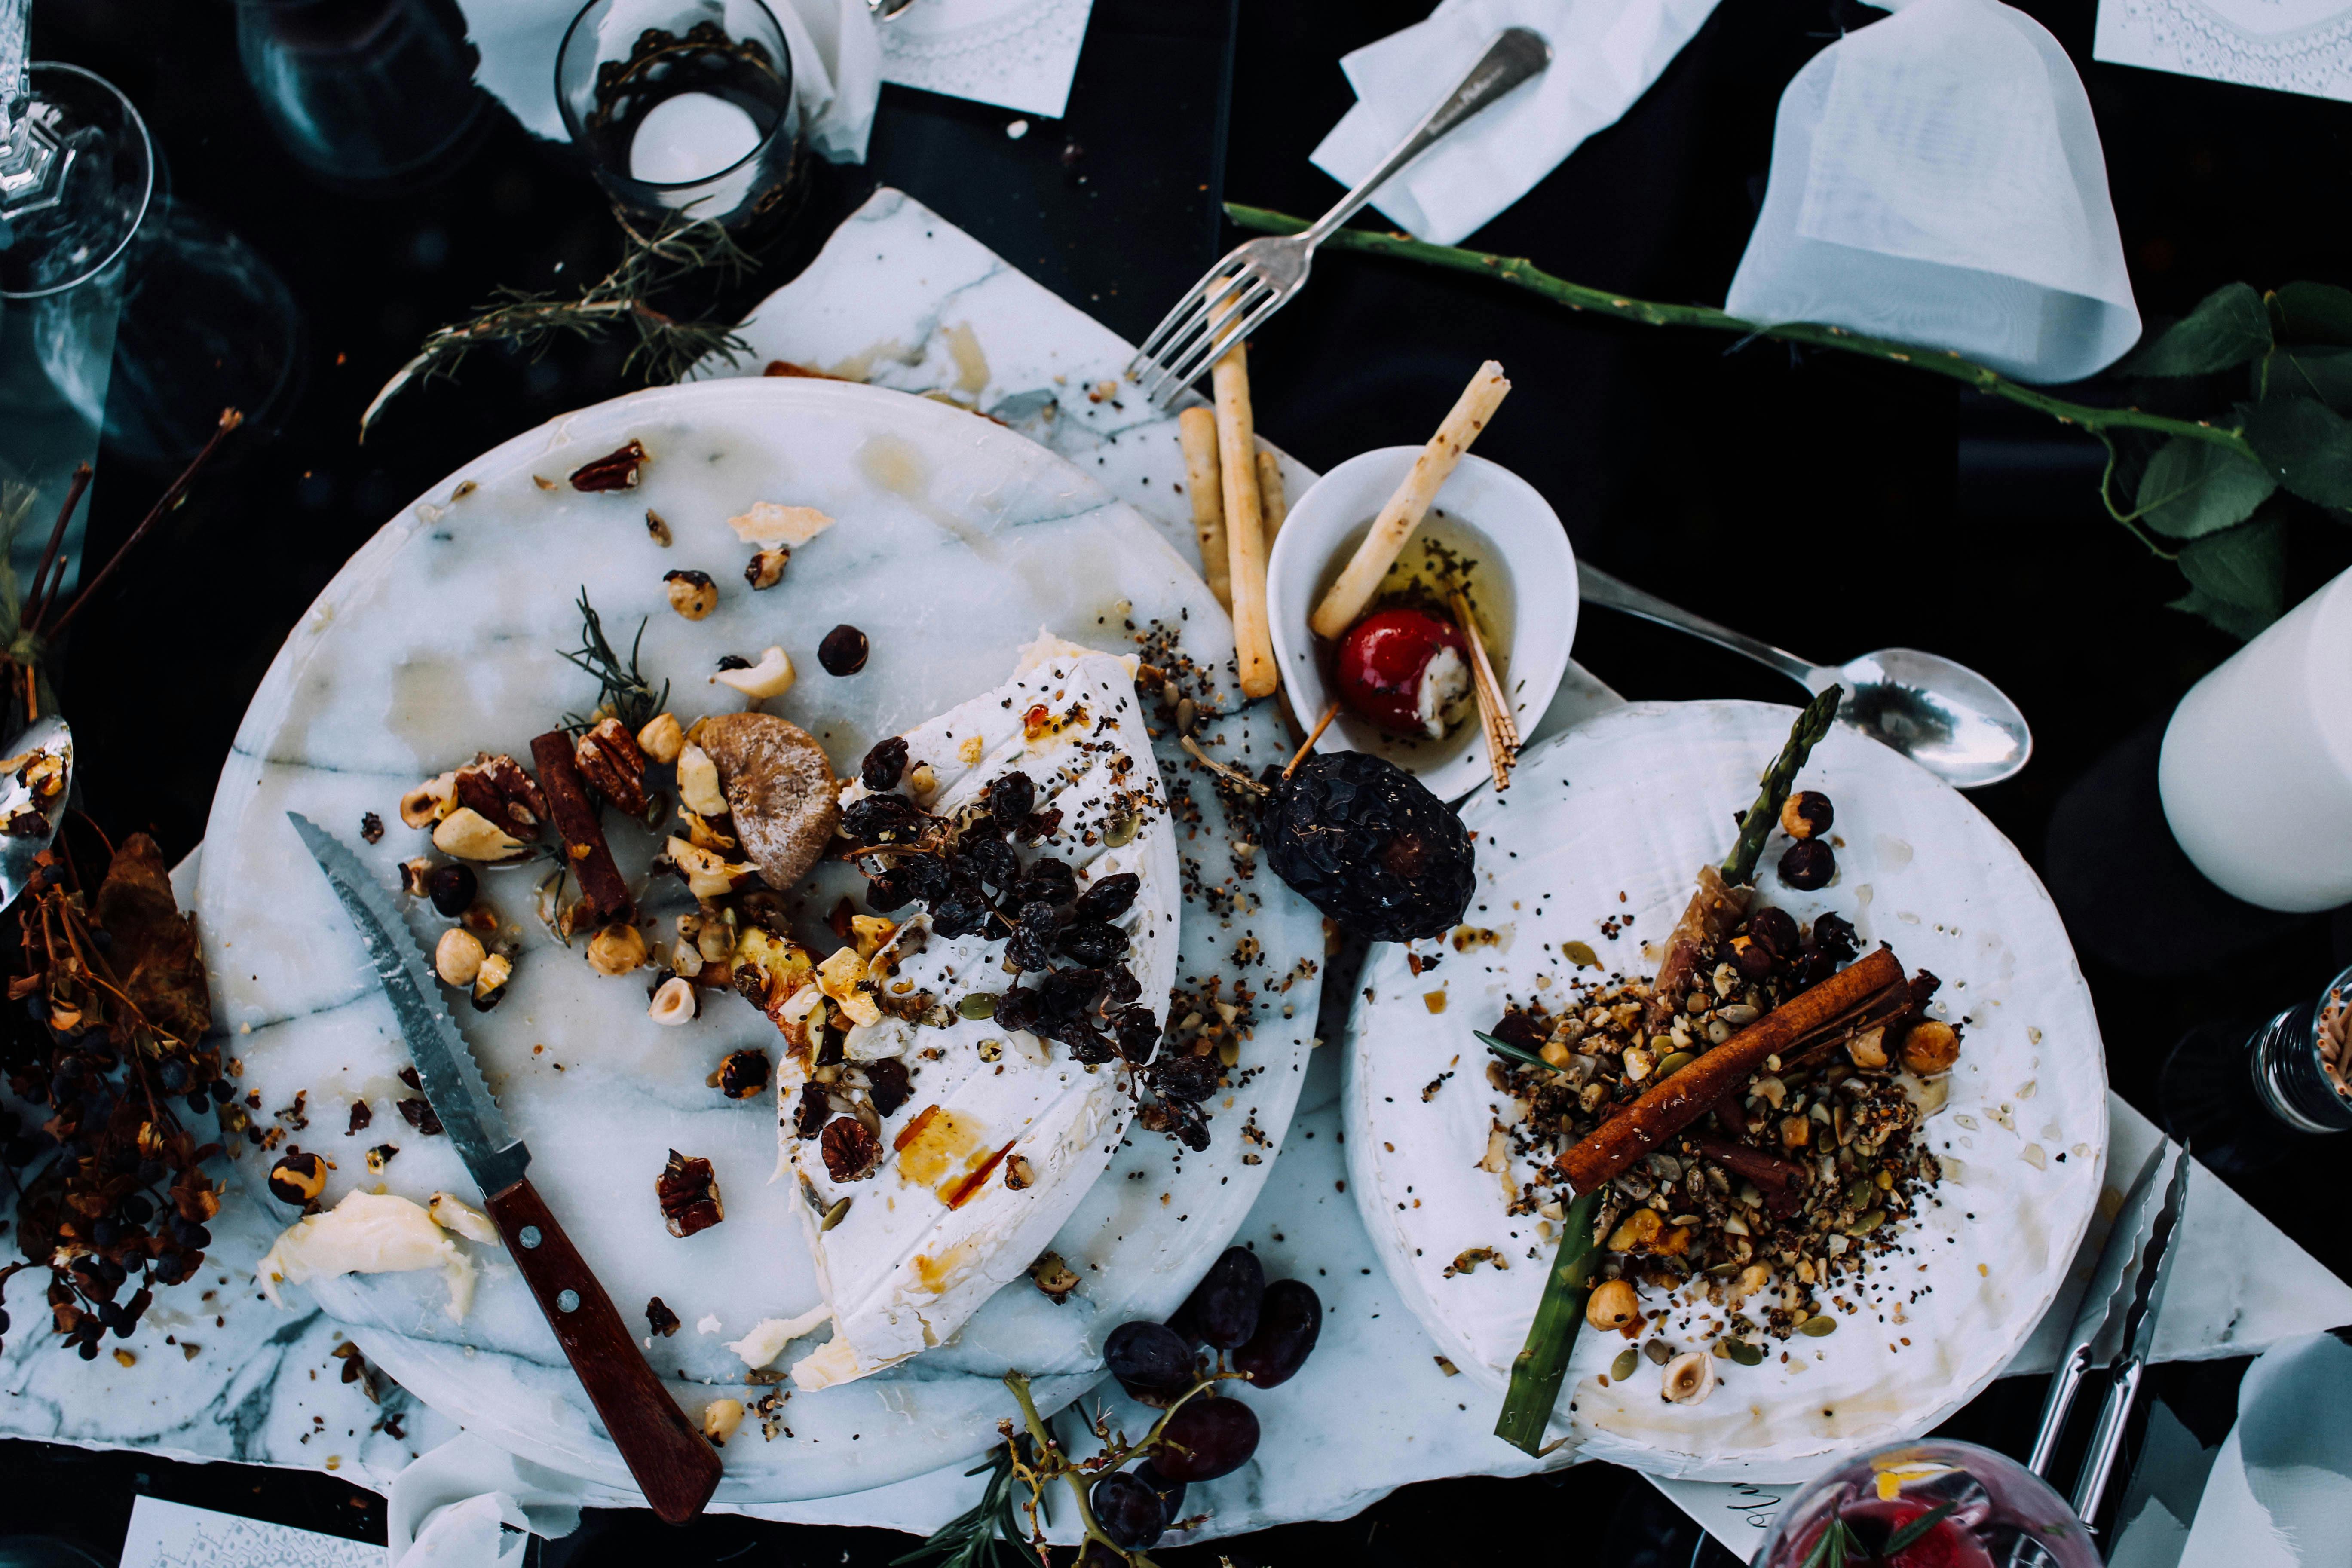 Messy dishes | Source: Pexels